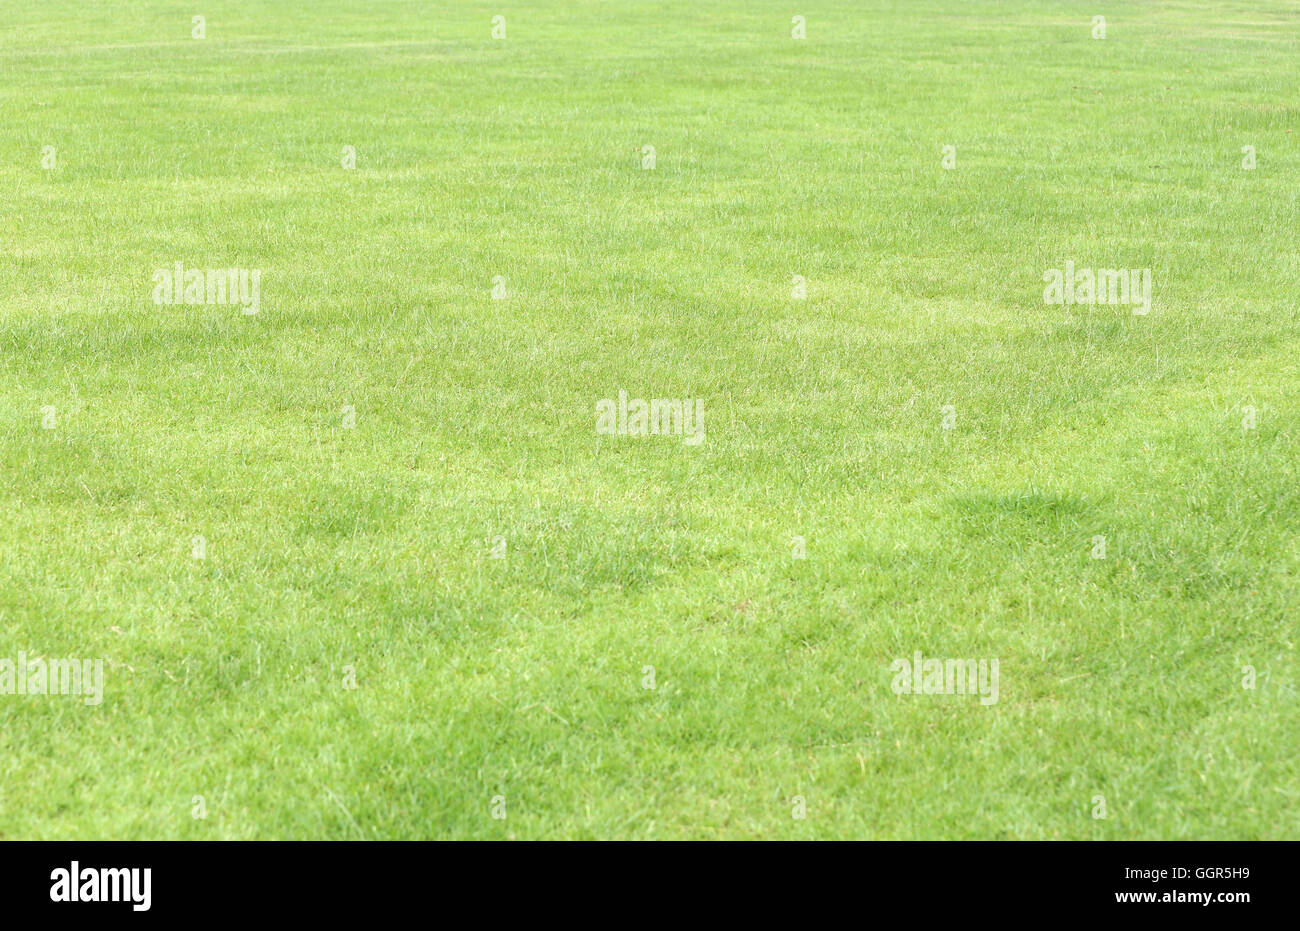 green lawn in the public garden for the nature background. Stock Photo